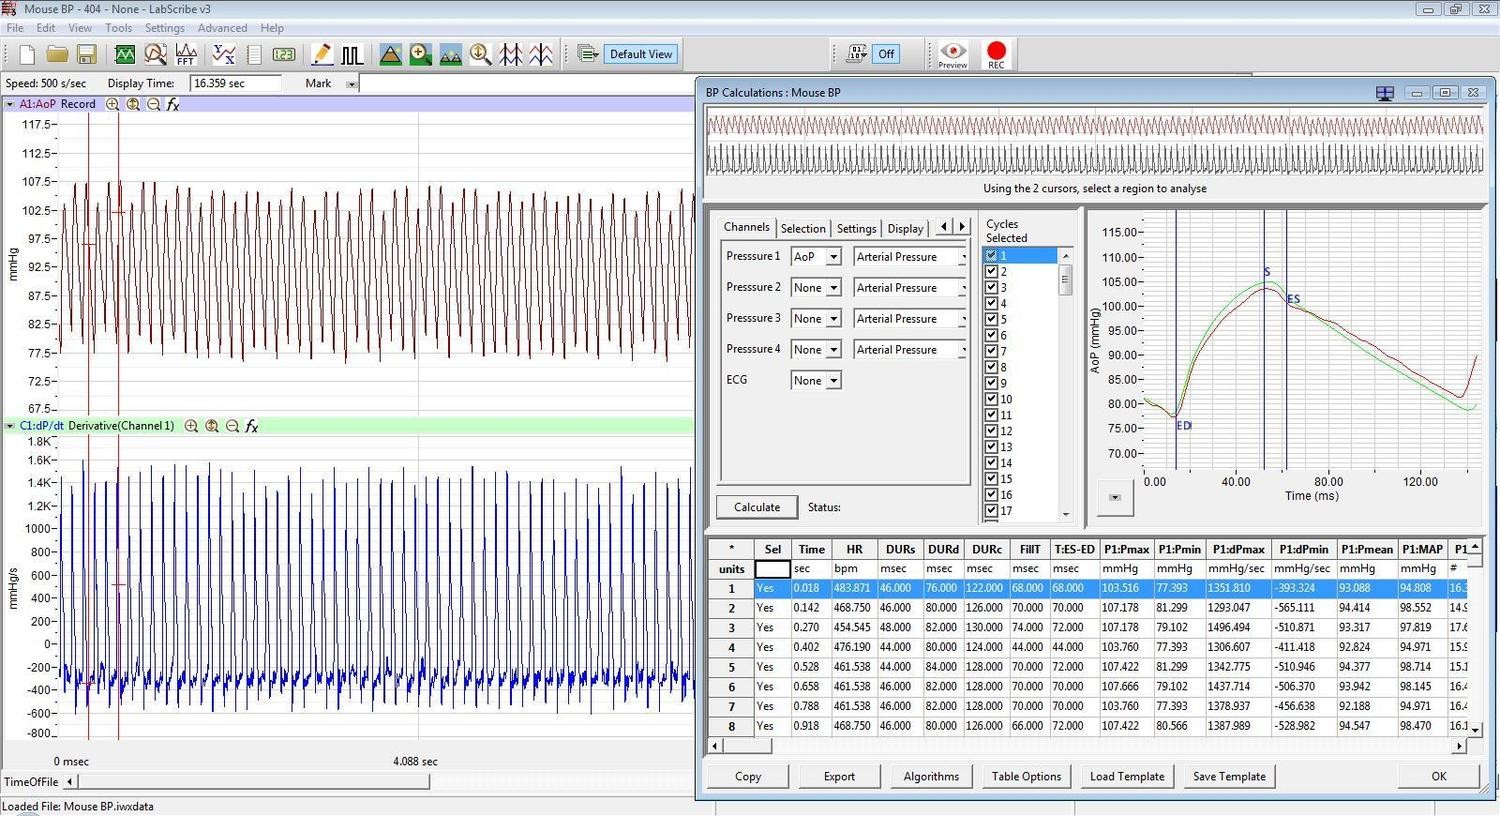 Blood Pressure Analysis Module for LabScribe Software